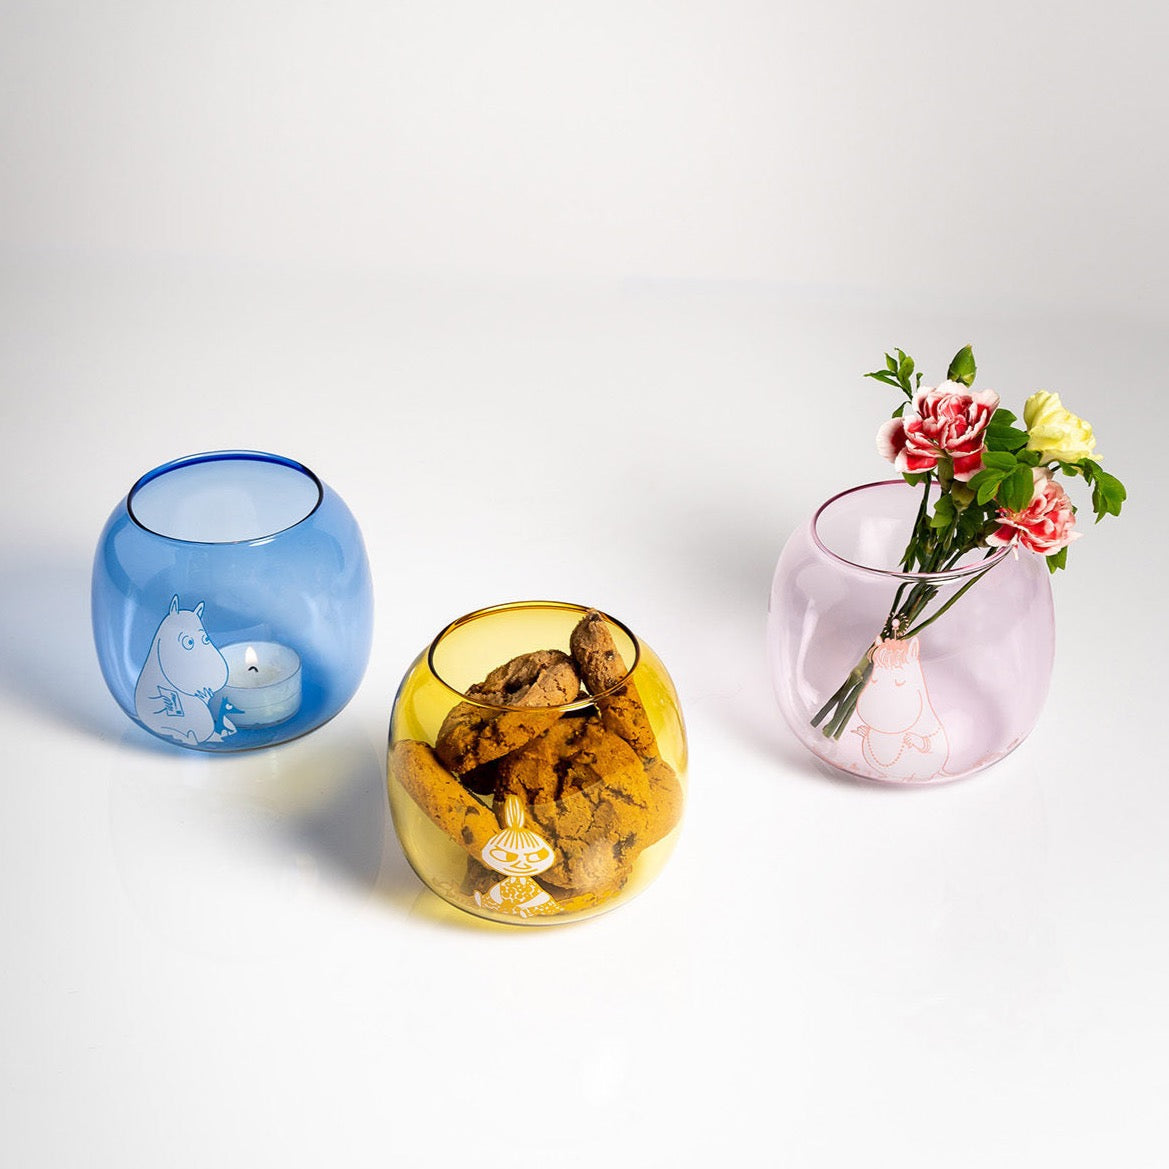 Moomin Candleholders By Muurla for candles, biscuits, or flowers!